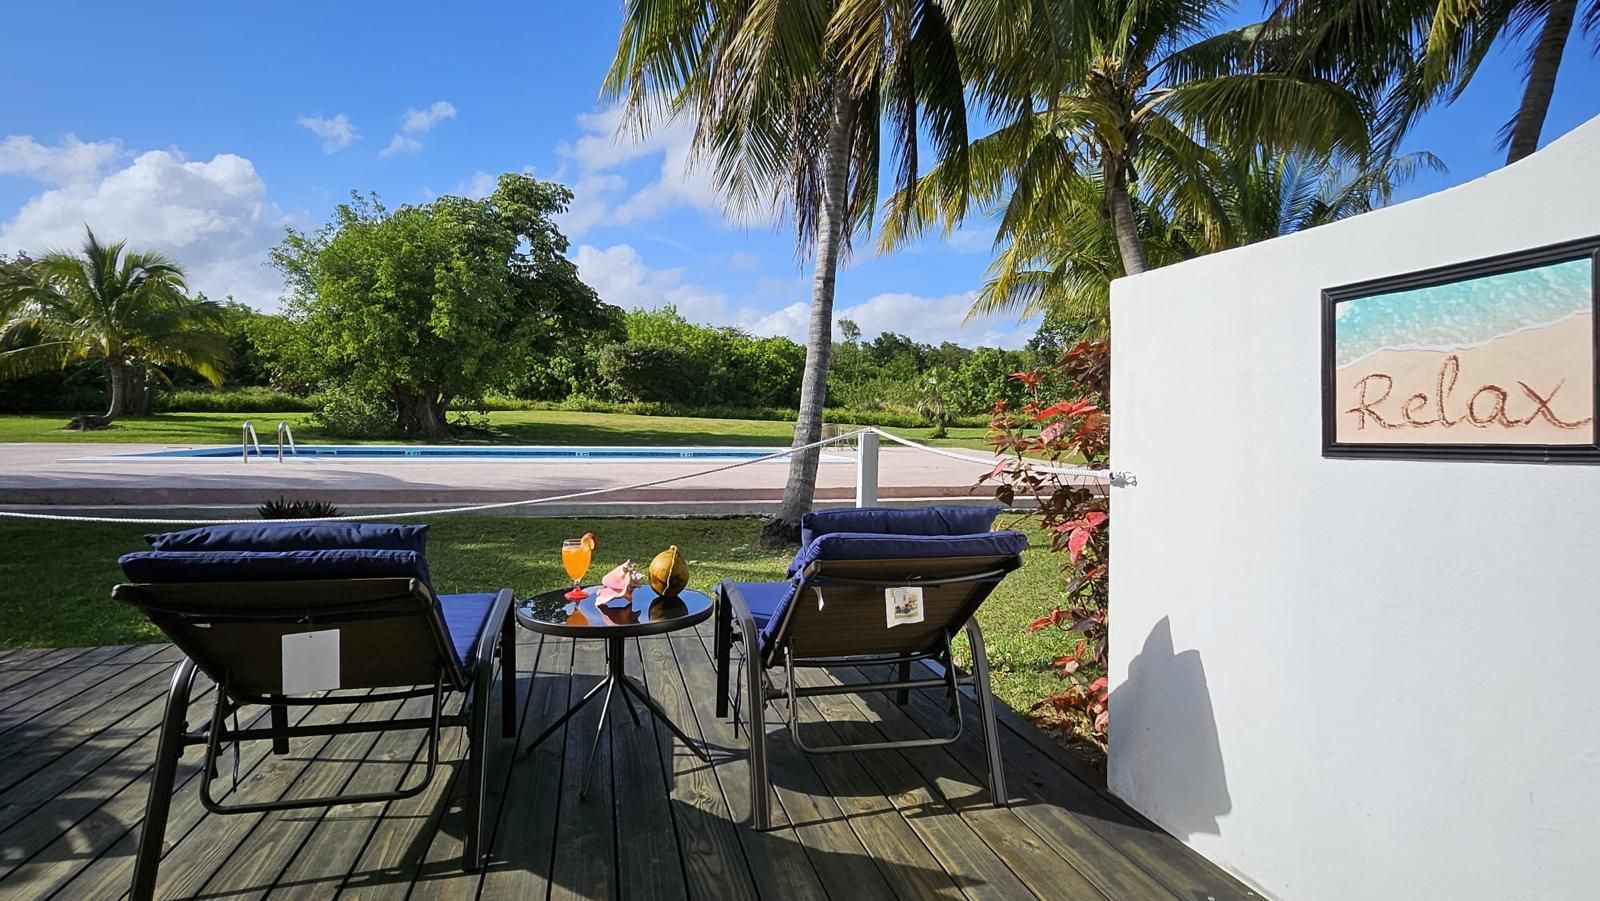 Unique Opportunity Apartment in the Bahamas at the price of Pipera